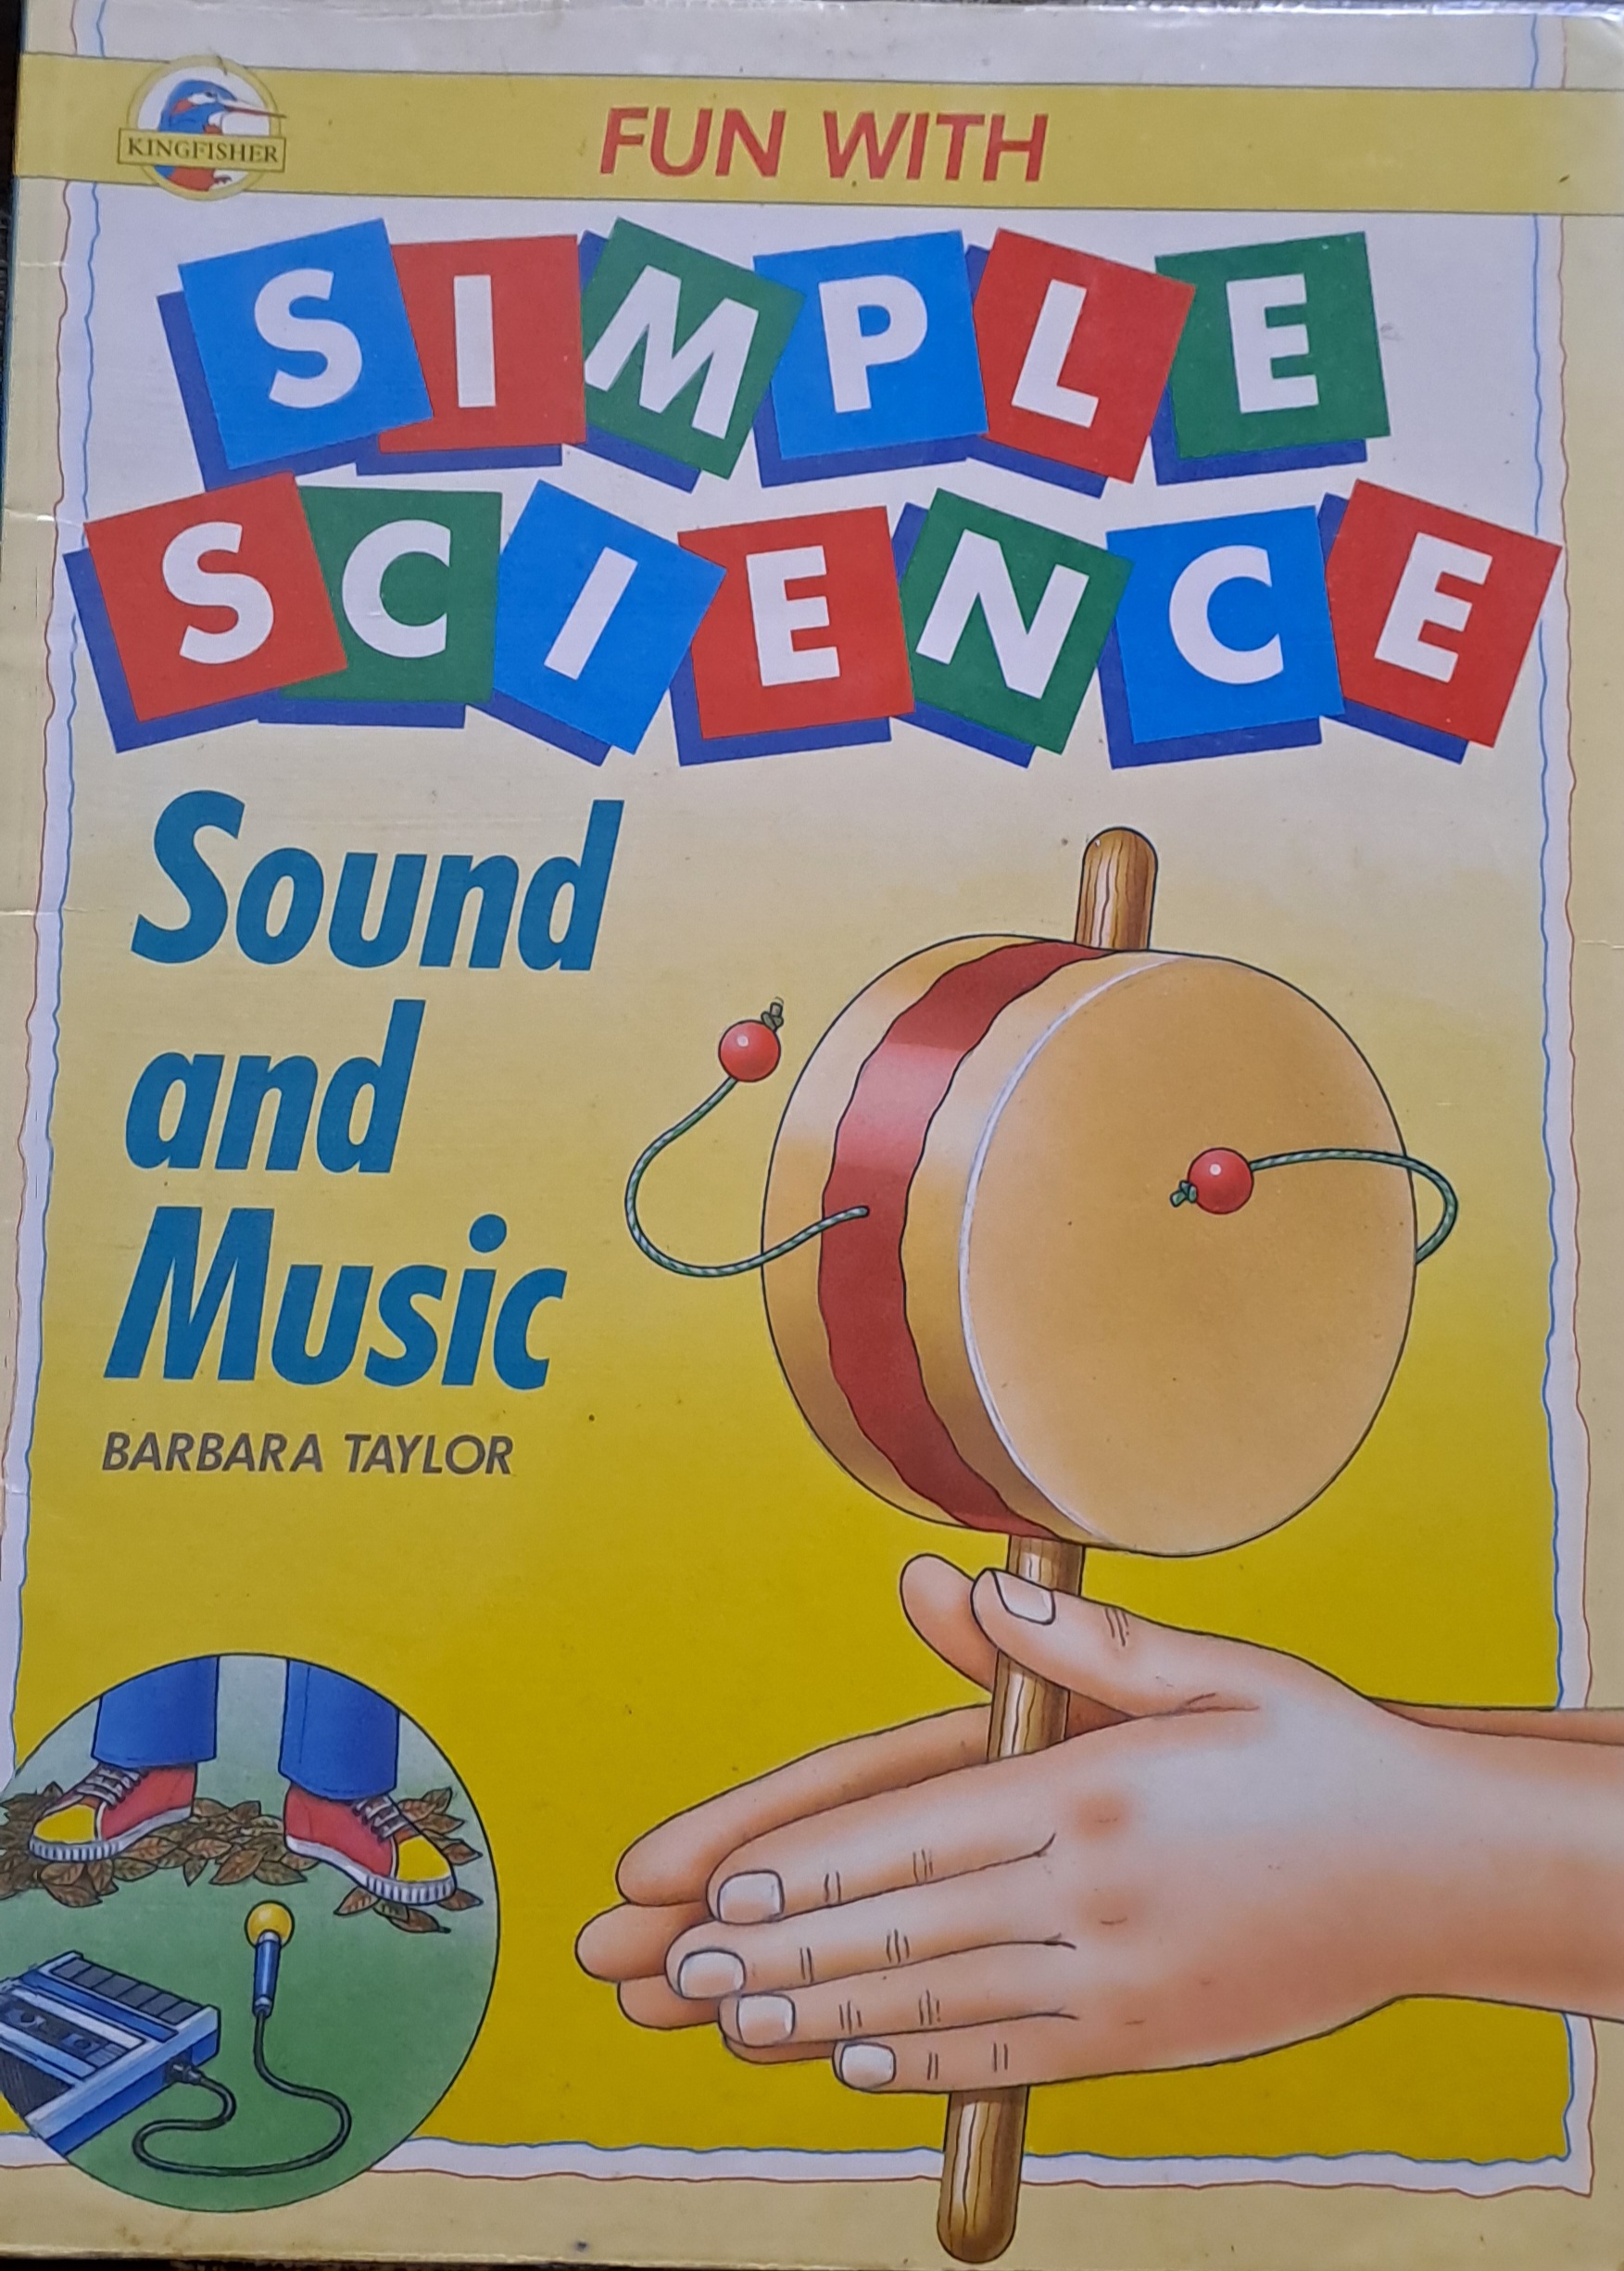 IMG : Fun with Simple Science Sound and Music